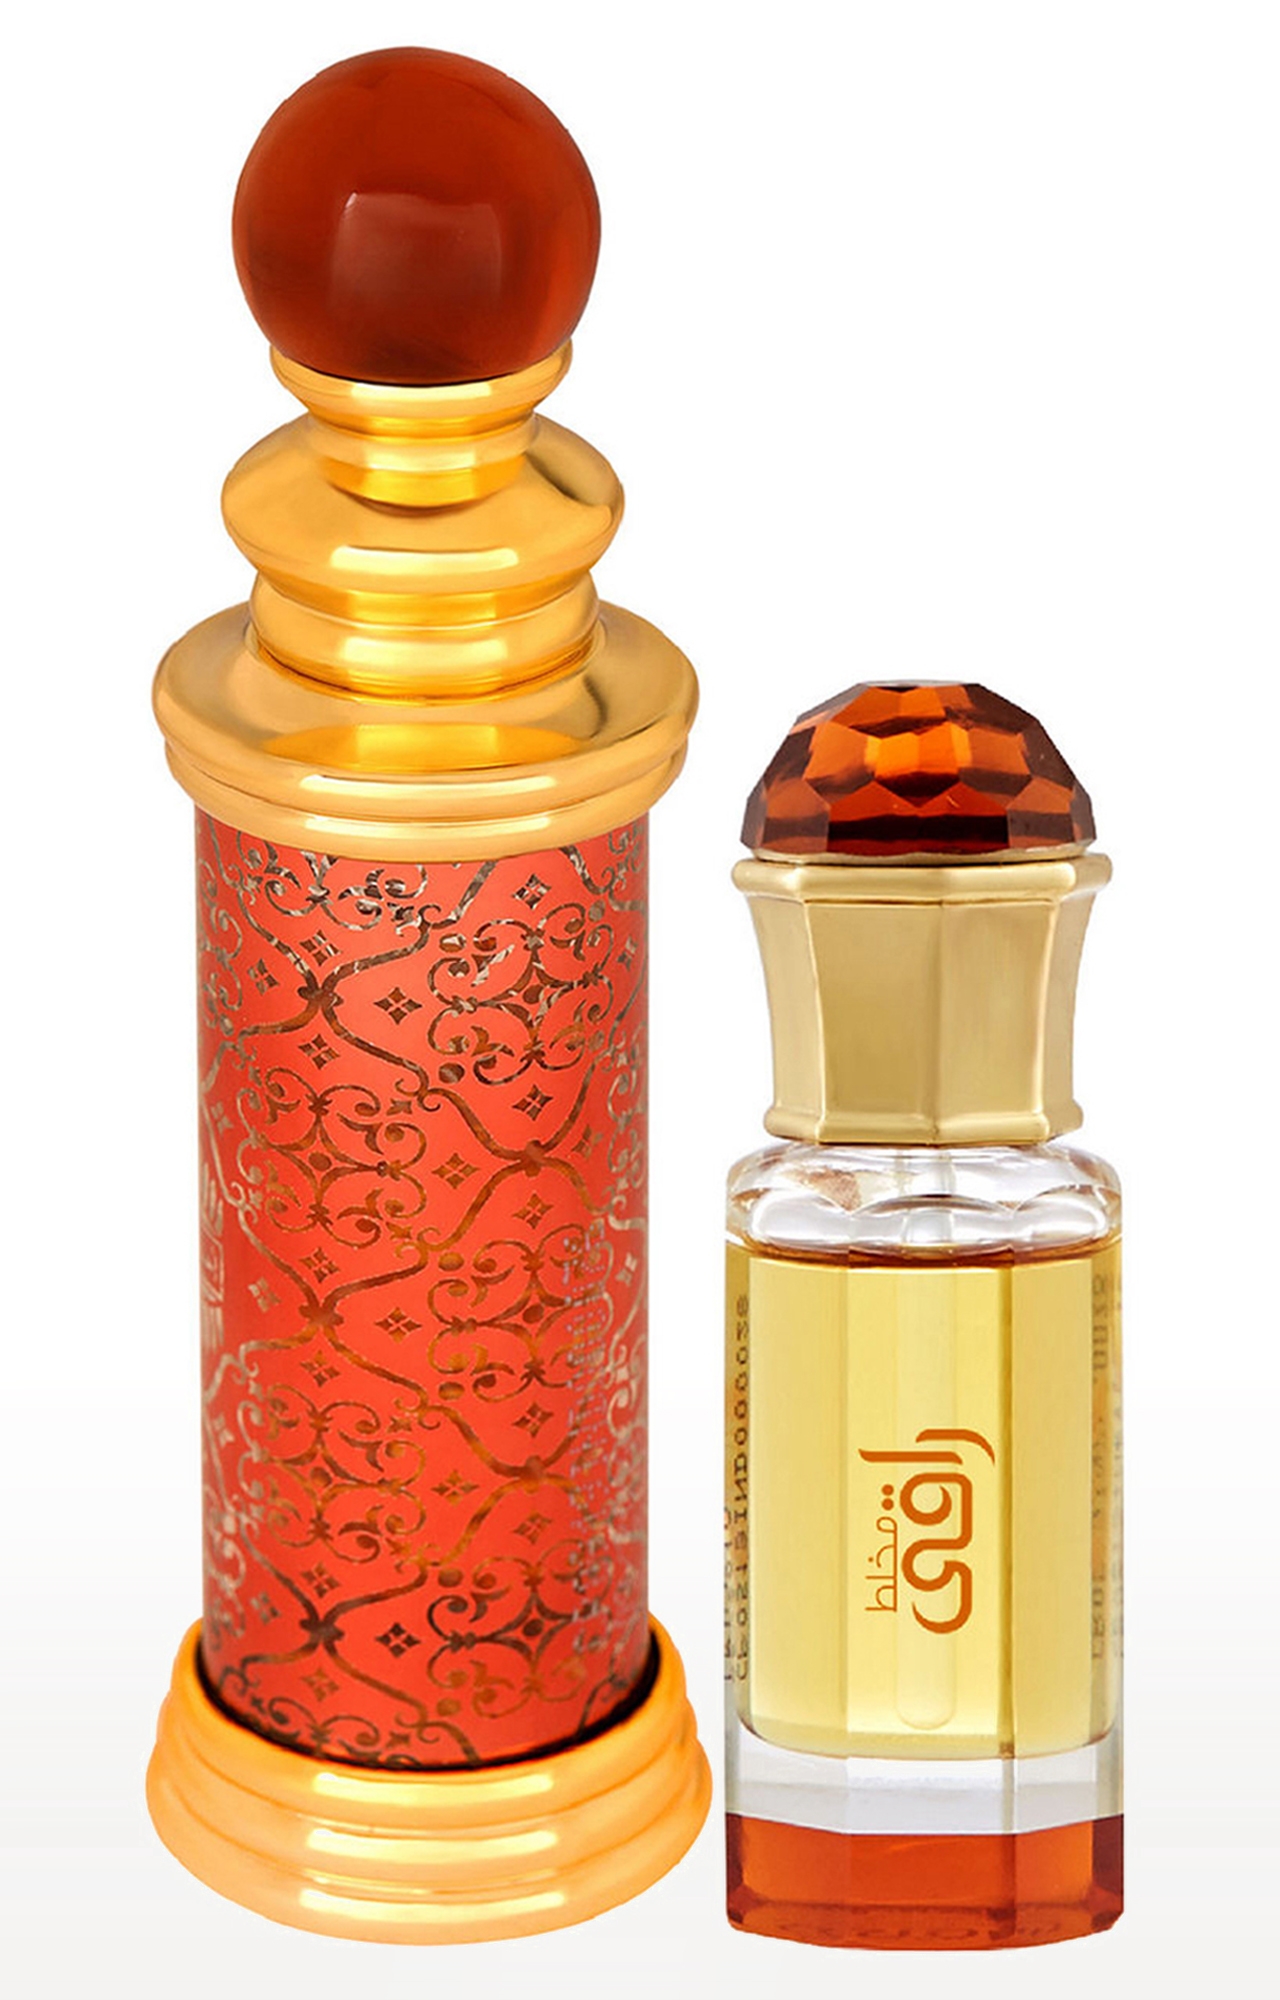 Ajmal Classic Oud Concentrated Perfume Oil Oudh Alcohol-free Attar 10ml for Unisex and Mukhallat Raaqi Concentrated Perfume Oil Alcohol-free Attar 10ml for Unisex